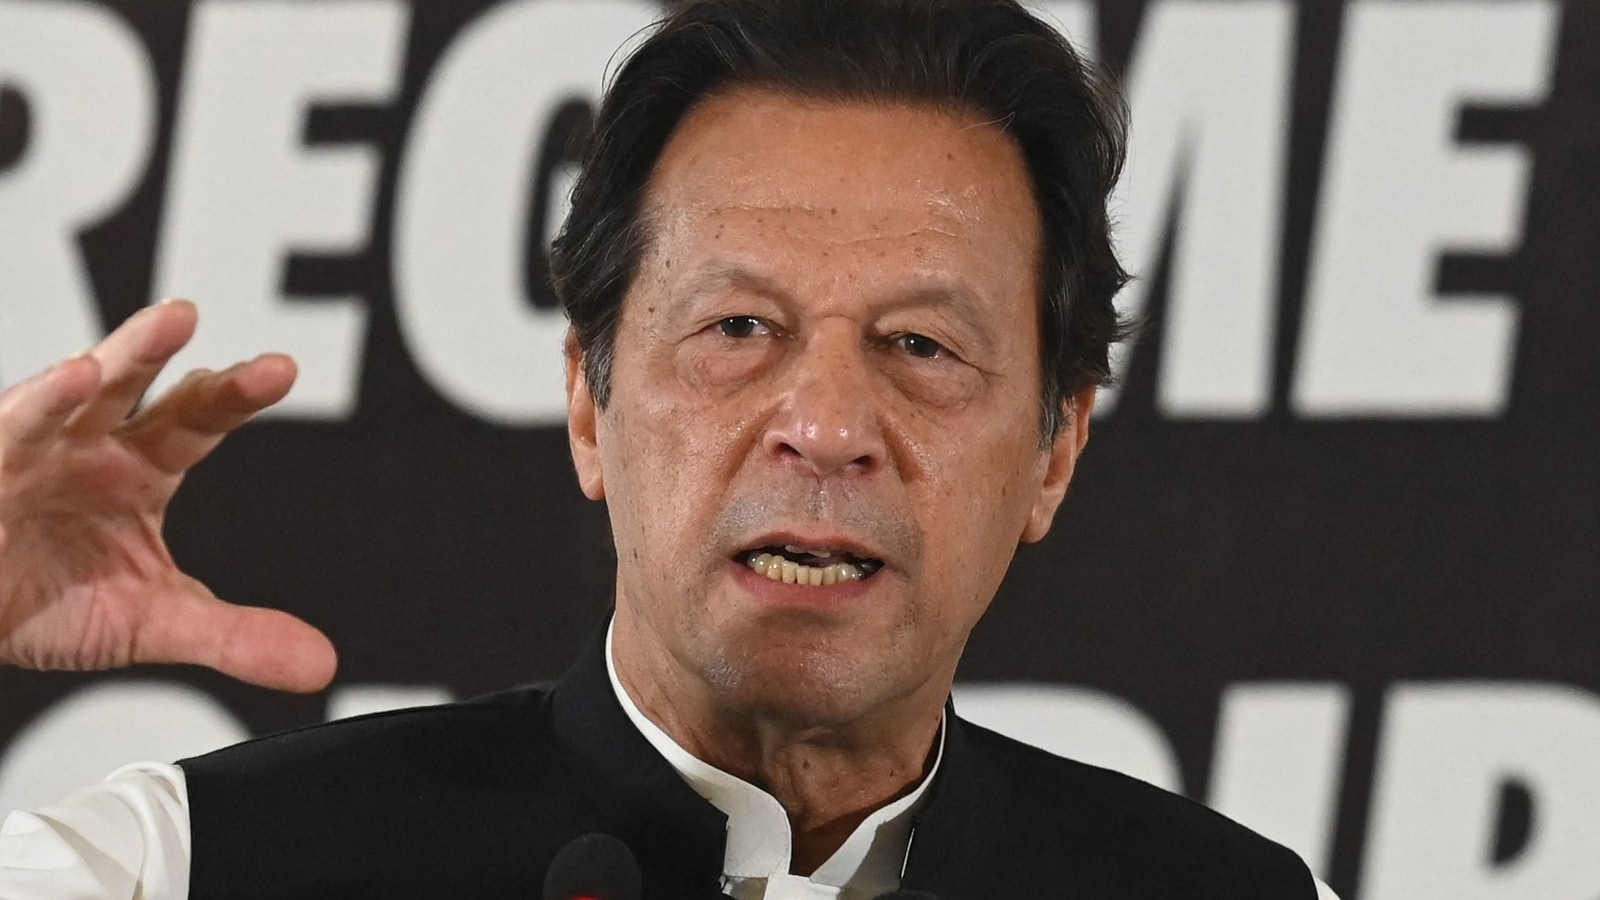 Pakistan govt sunk to new low: Ex-PM Imran Khan after ban on his ...